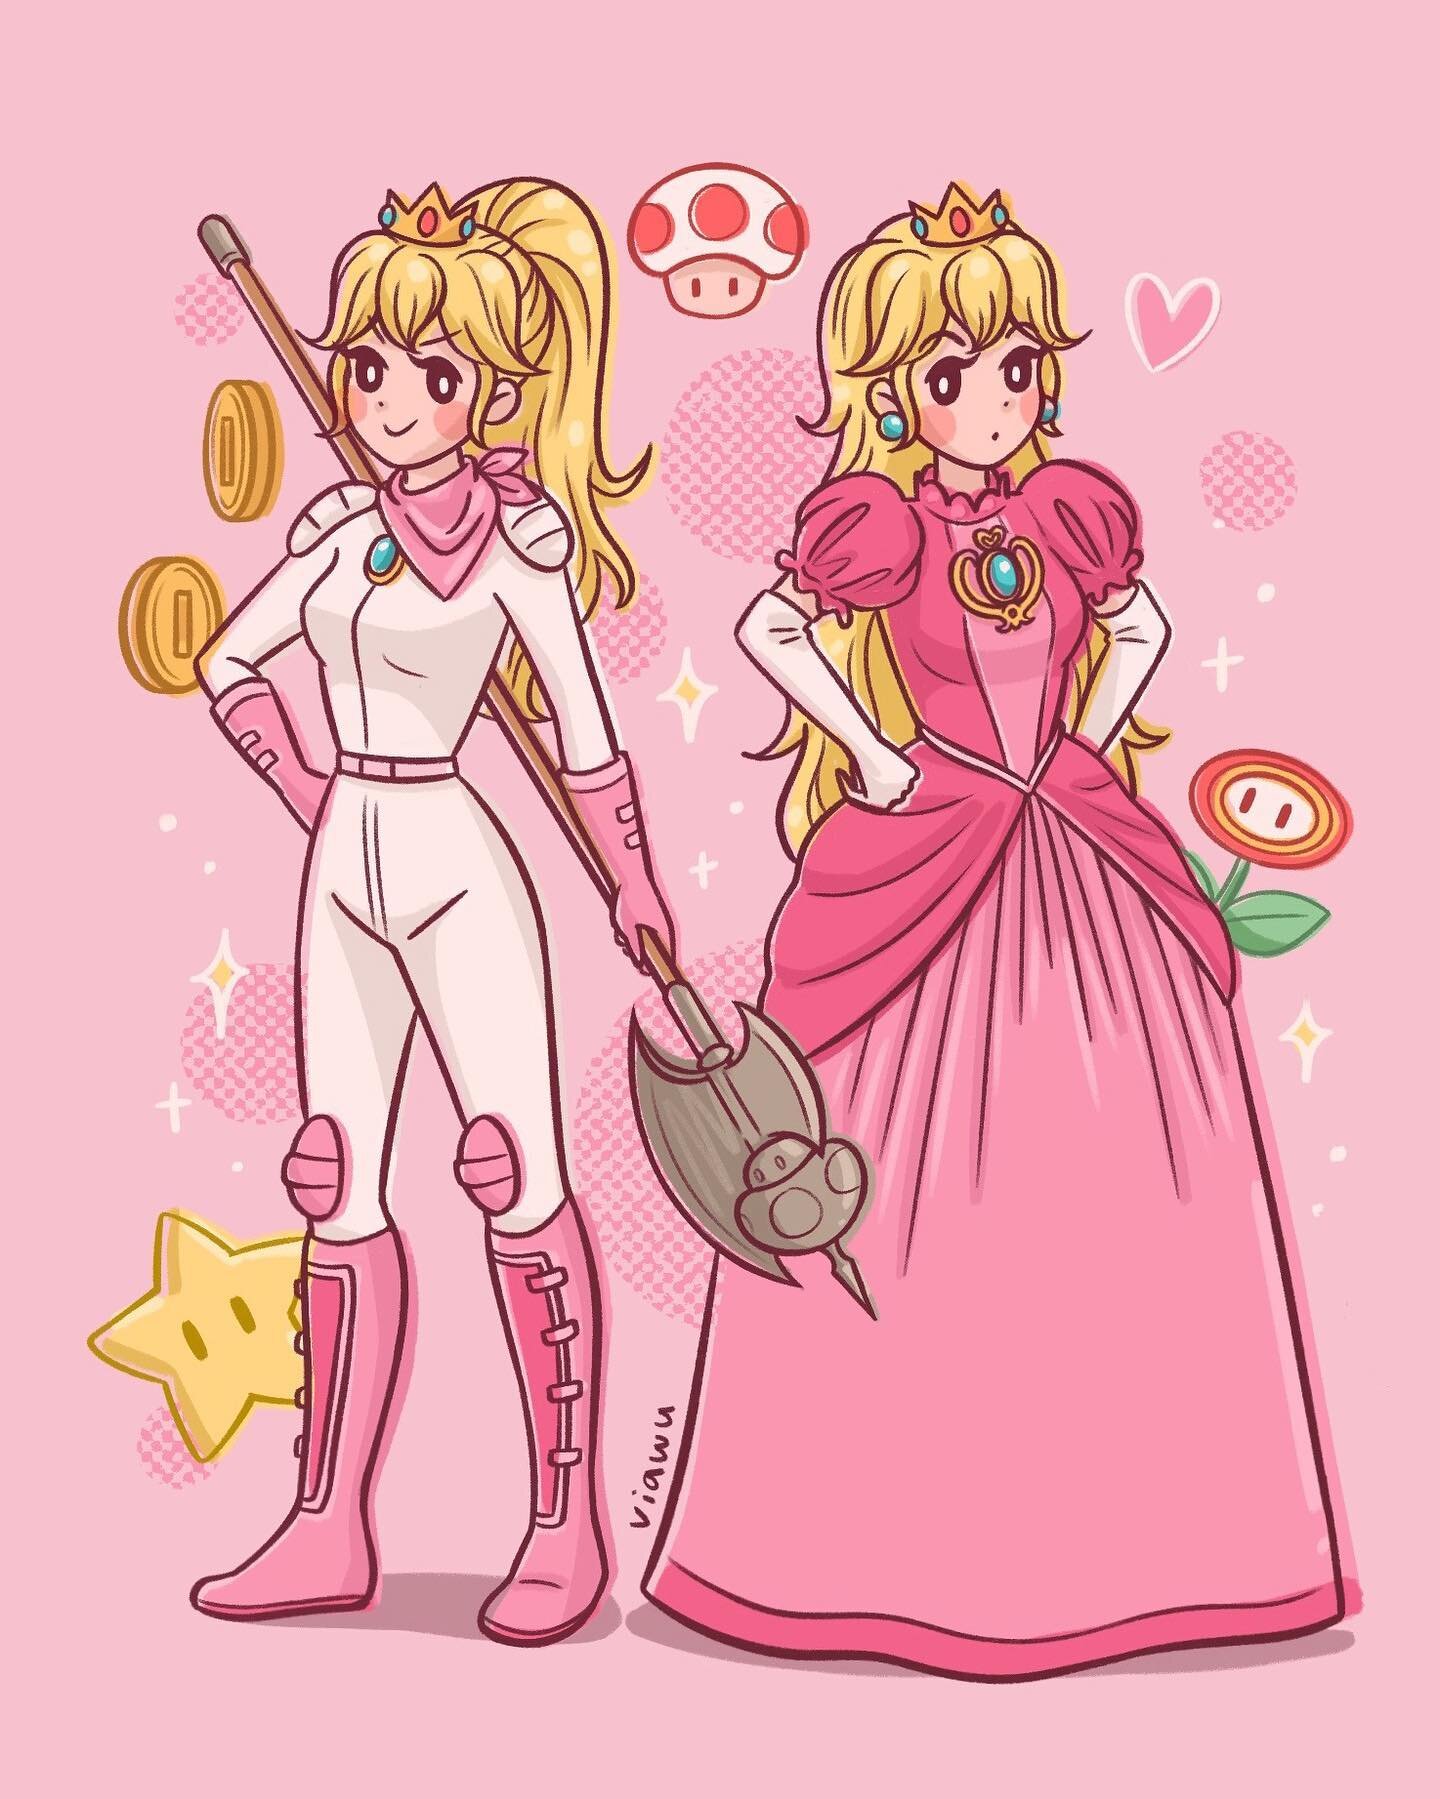 Princess Peach💖

Have you watched the Super Mario Bros. yet? The movie is magical and the story line is SO FUN. With great animation plus the details they hid everywhere, it&rsquo;s just🤌🏻🤌🏻

I&rsquo;m a big fan of DK now, but I also love Mario 